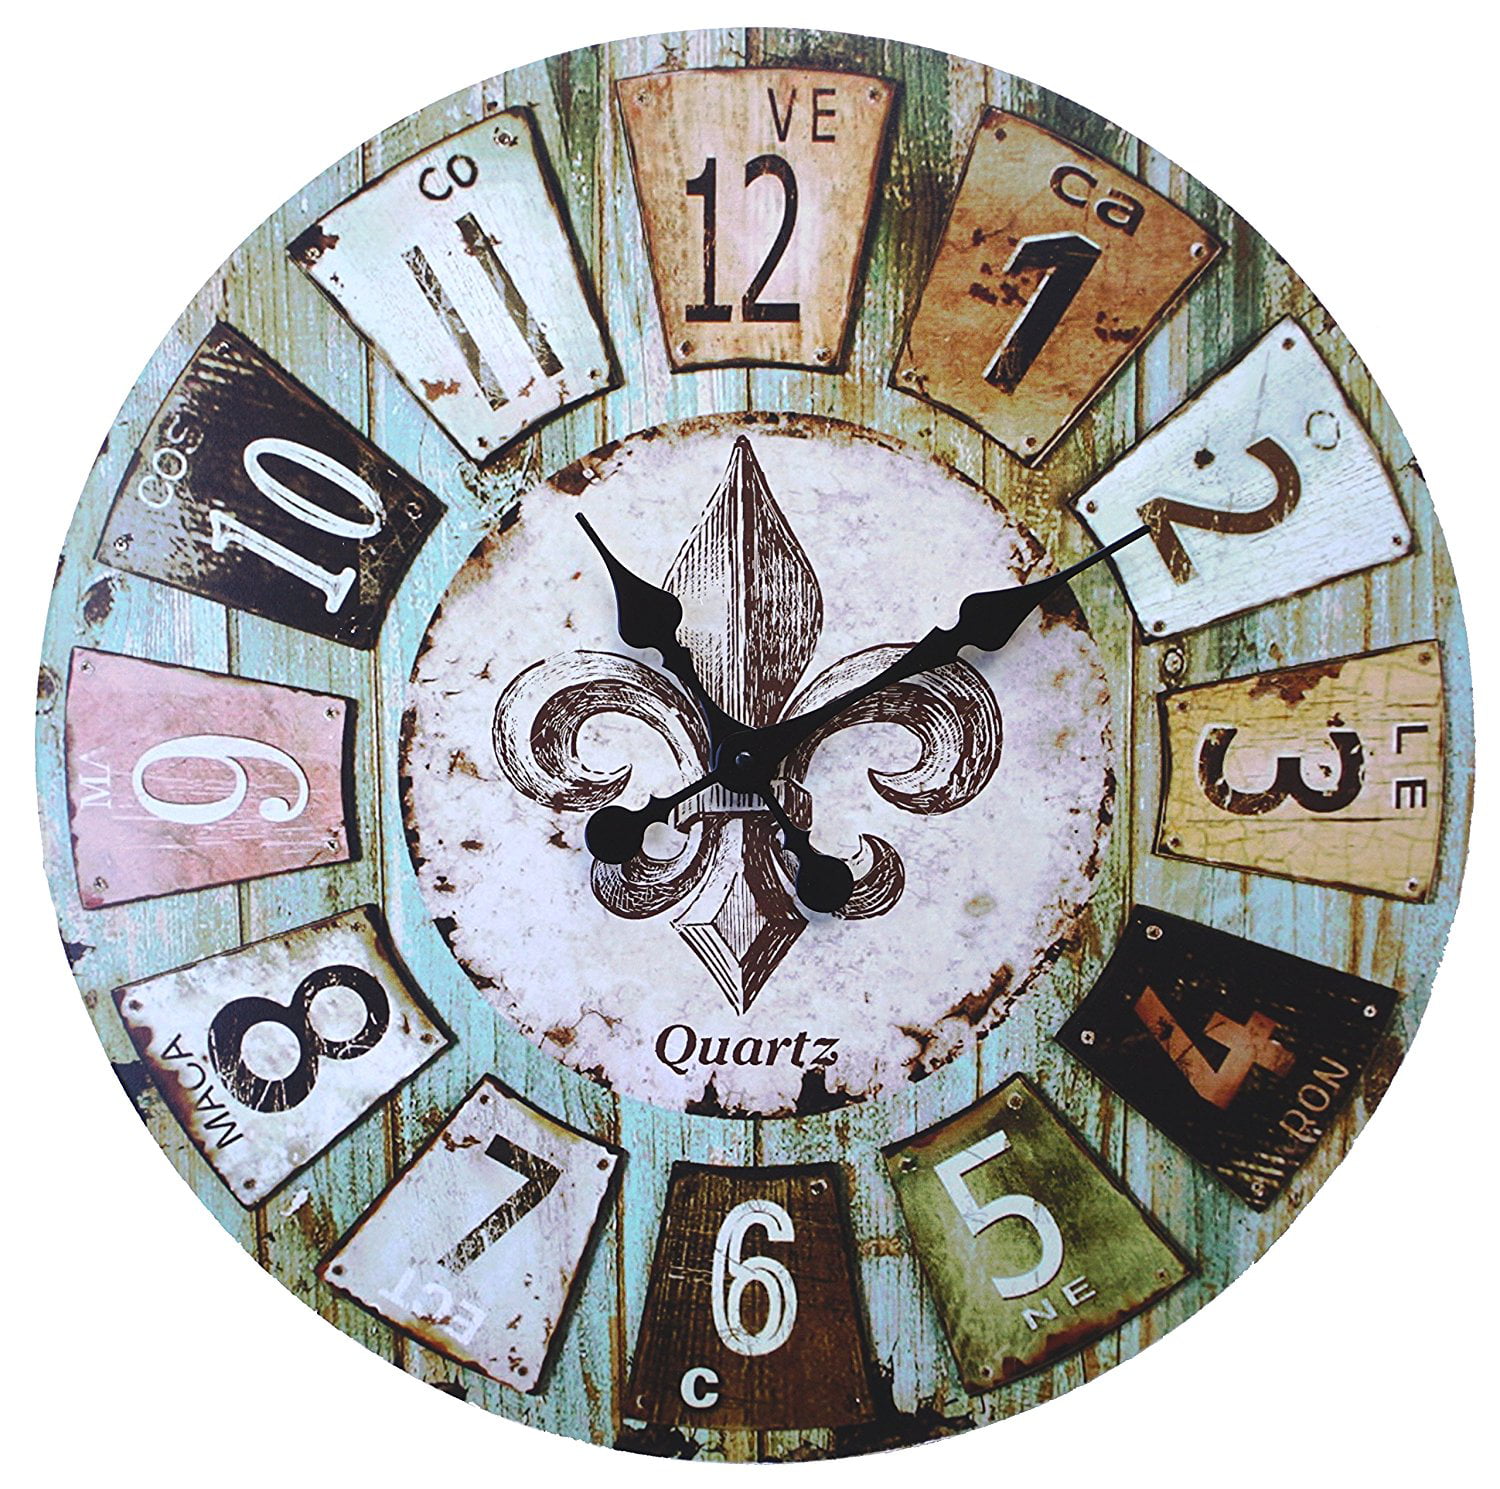 Old Time Old time French Country Style Rustic Round Wood Wall Clock 23 LH34OT LuLu Decor Large Roman Numerals Old time French Country Style Rustic Round Wood Wall Clock 23 Inc